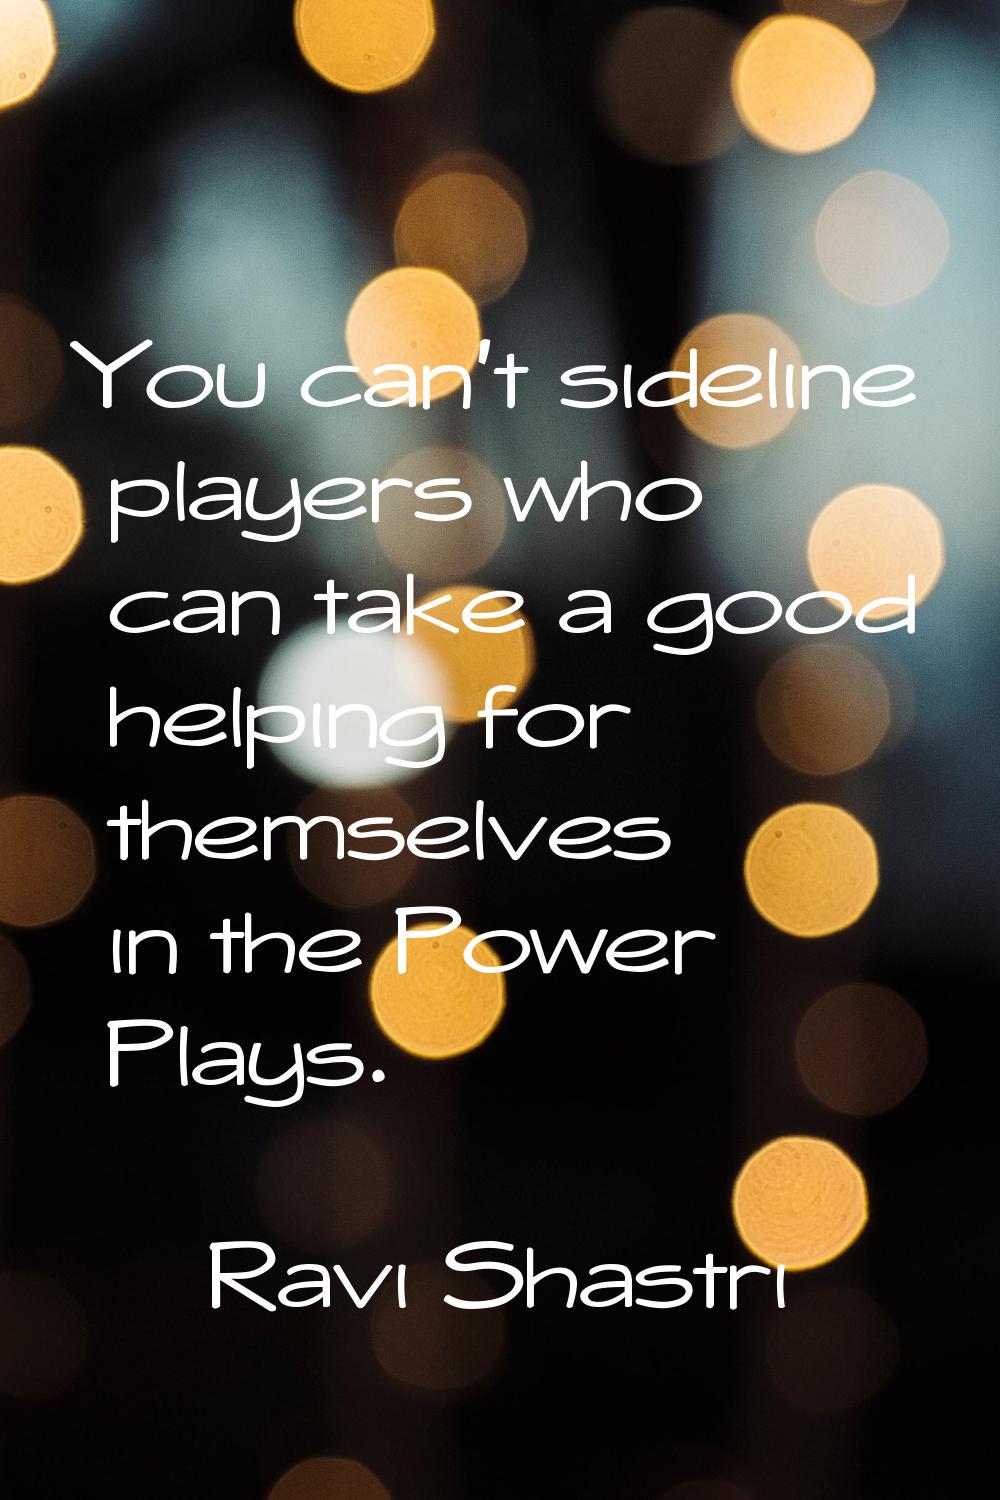 You can't sideline players who can take a good helping for themselves in the Power Plays.